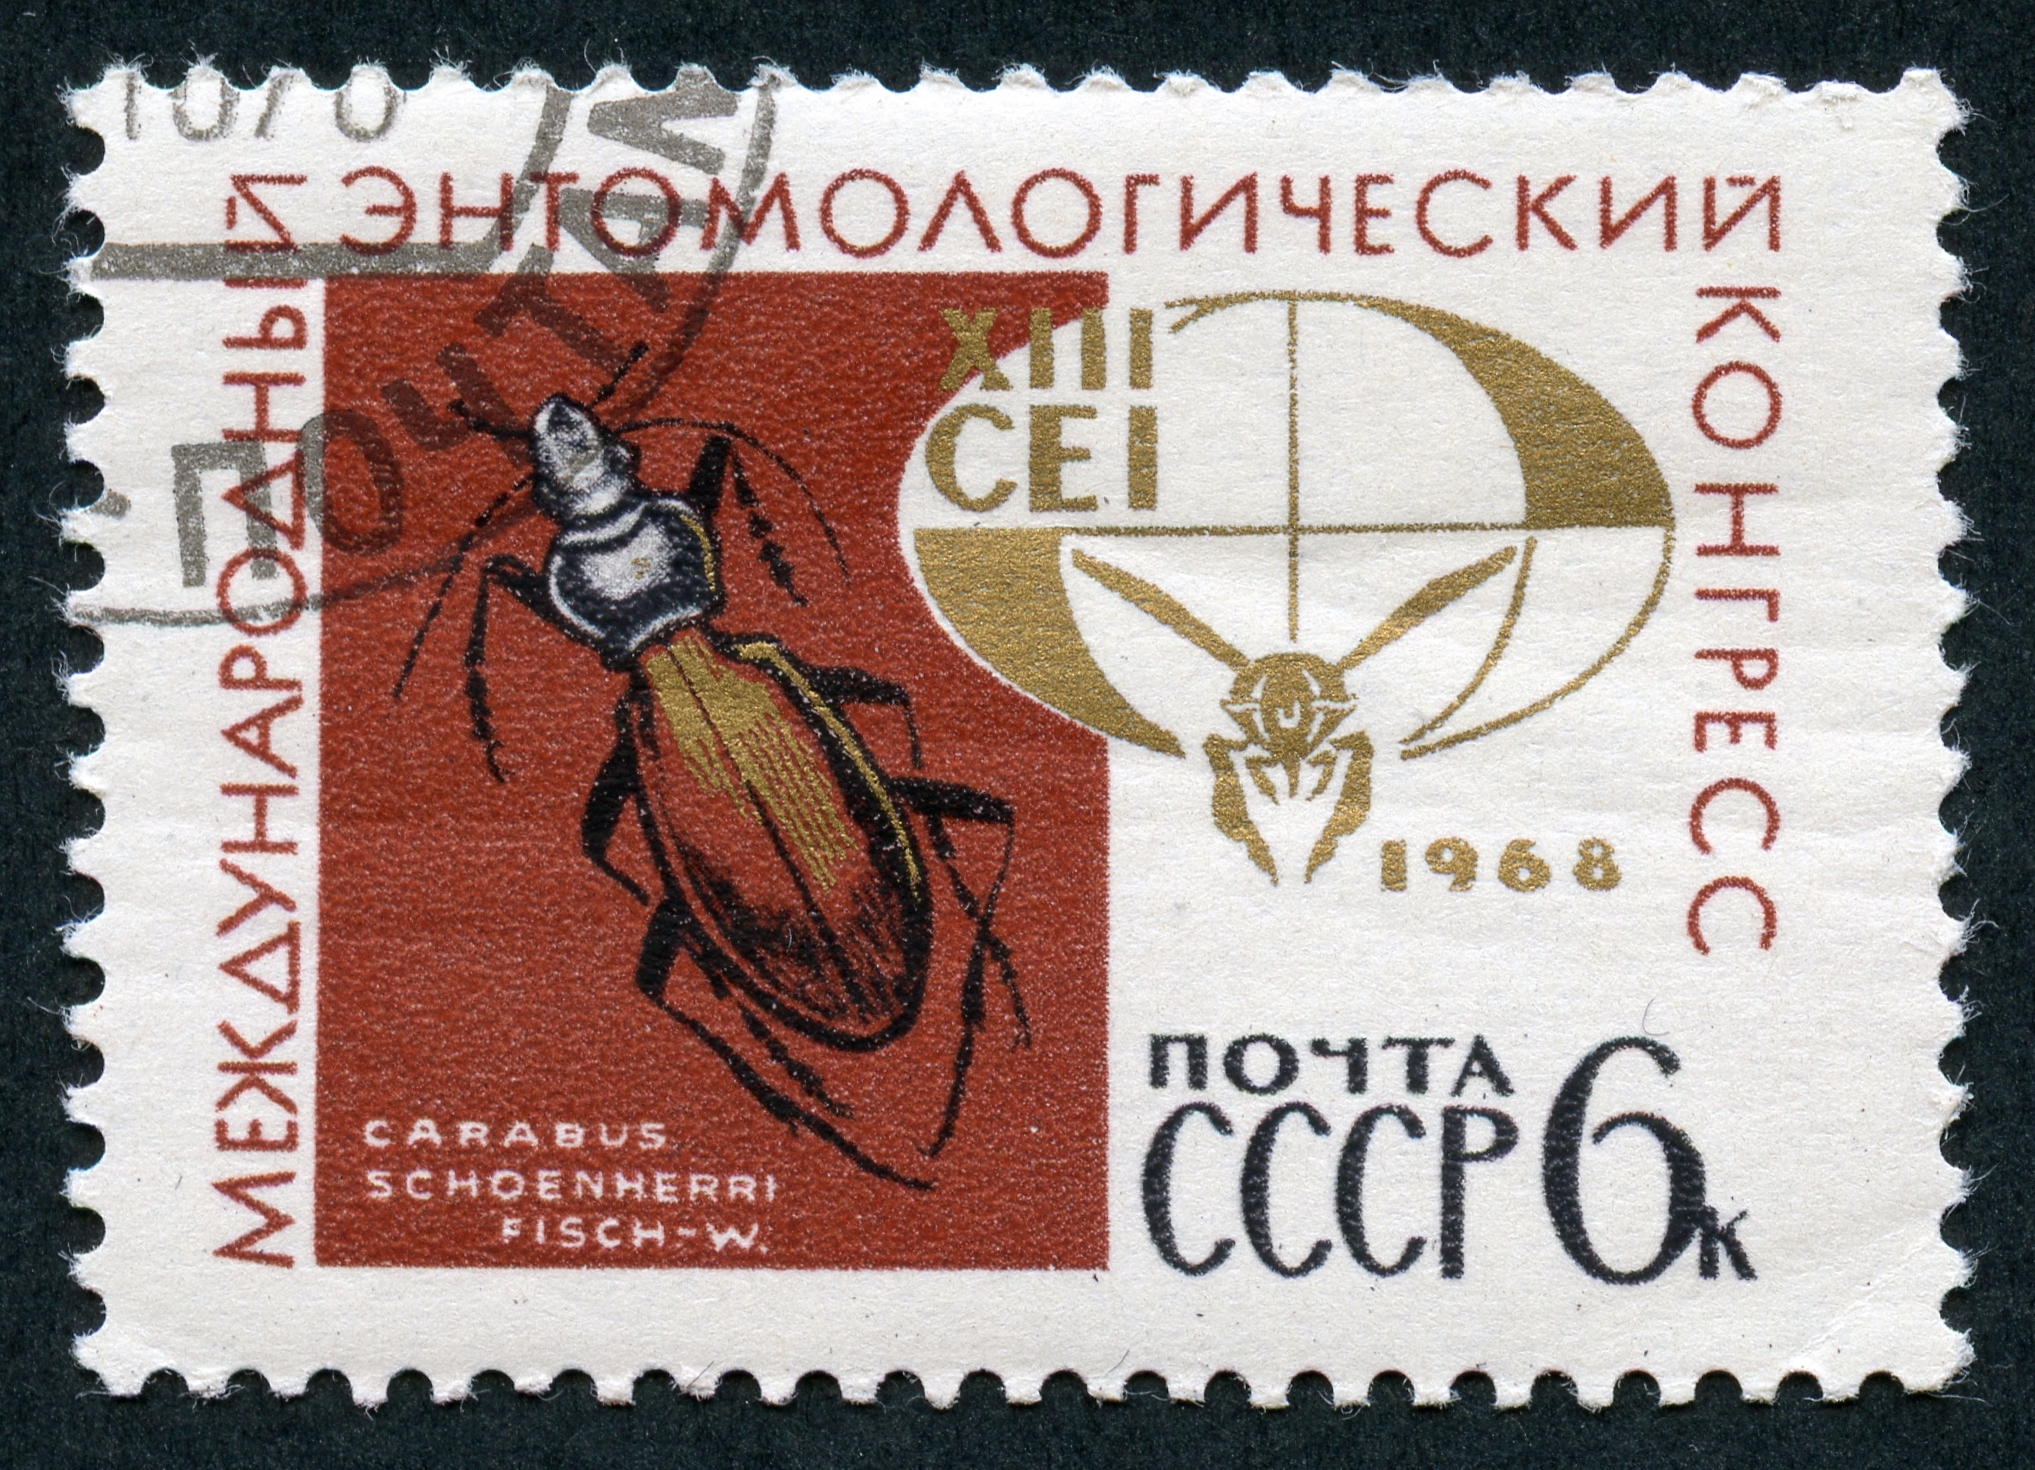 The Soviet Union 1968 CPA 3634 stamp (13th International Entomological Congress (1968, Moscow). Ground Beetle (Carabus schoenherri) and Emblem) cancelled